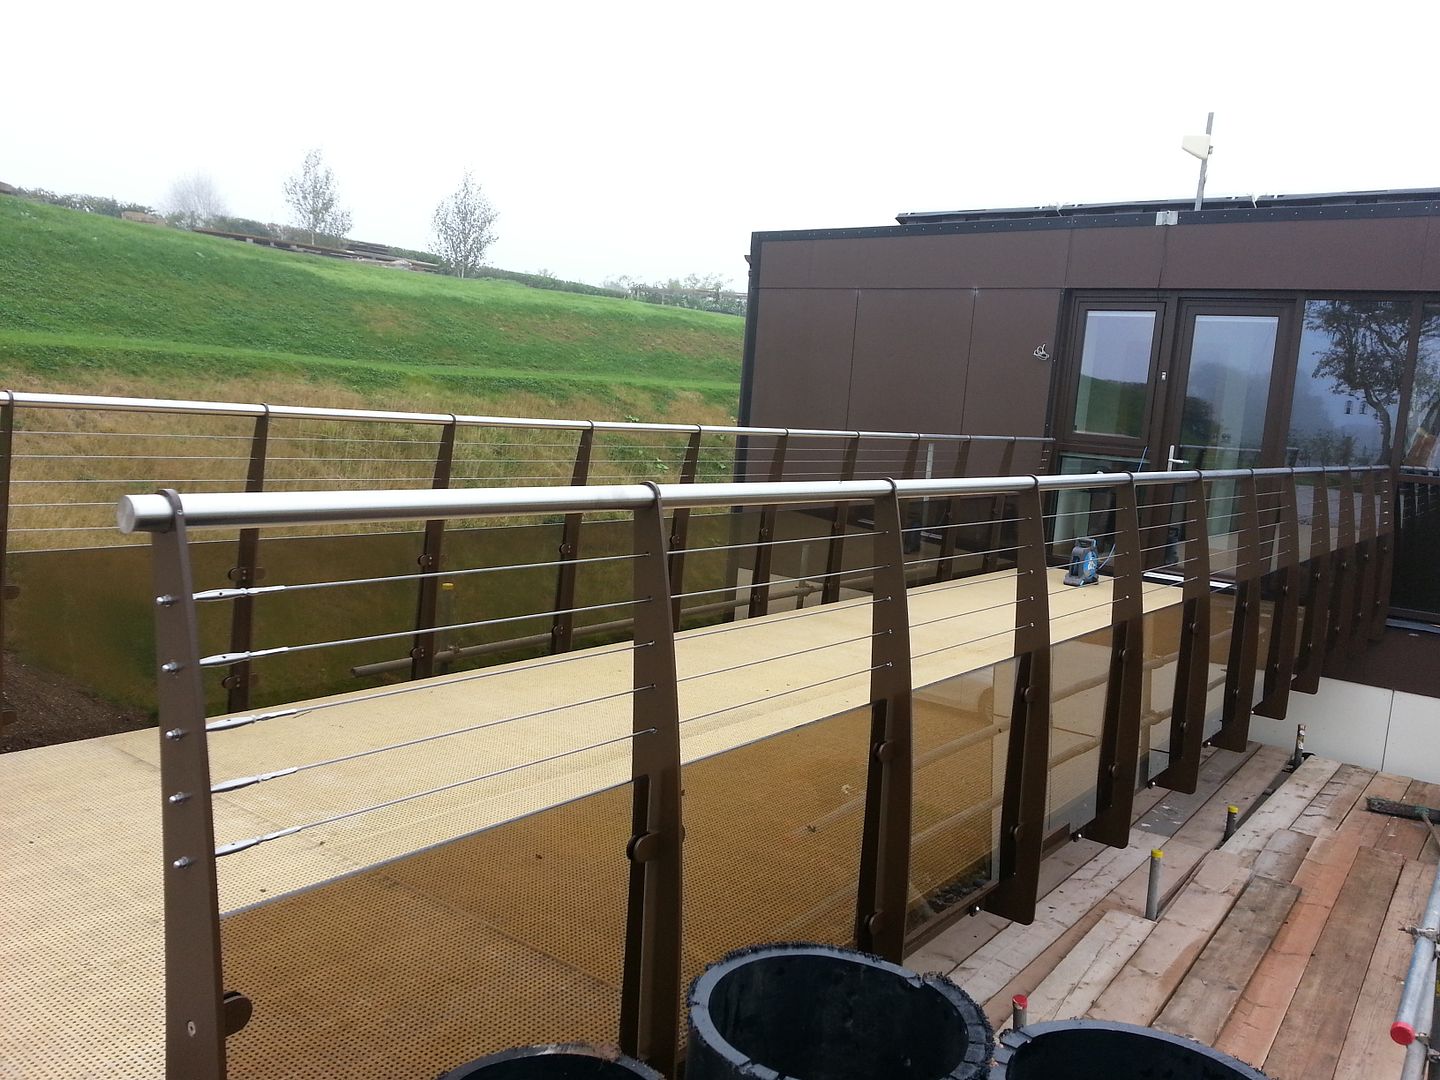 Bespoke bridge balustrade with tension wires and bronze glass